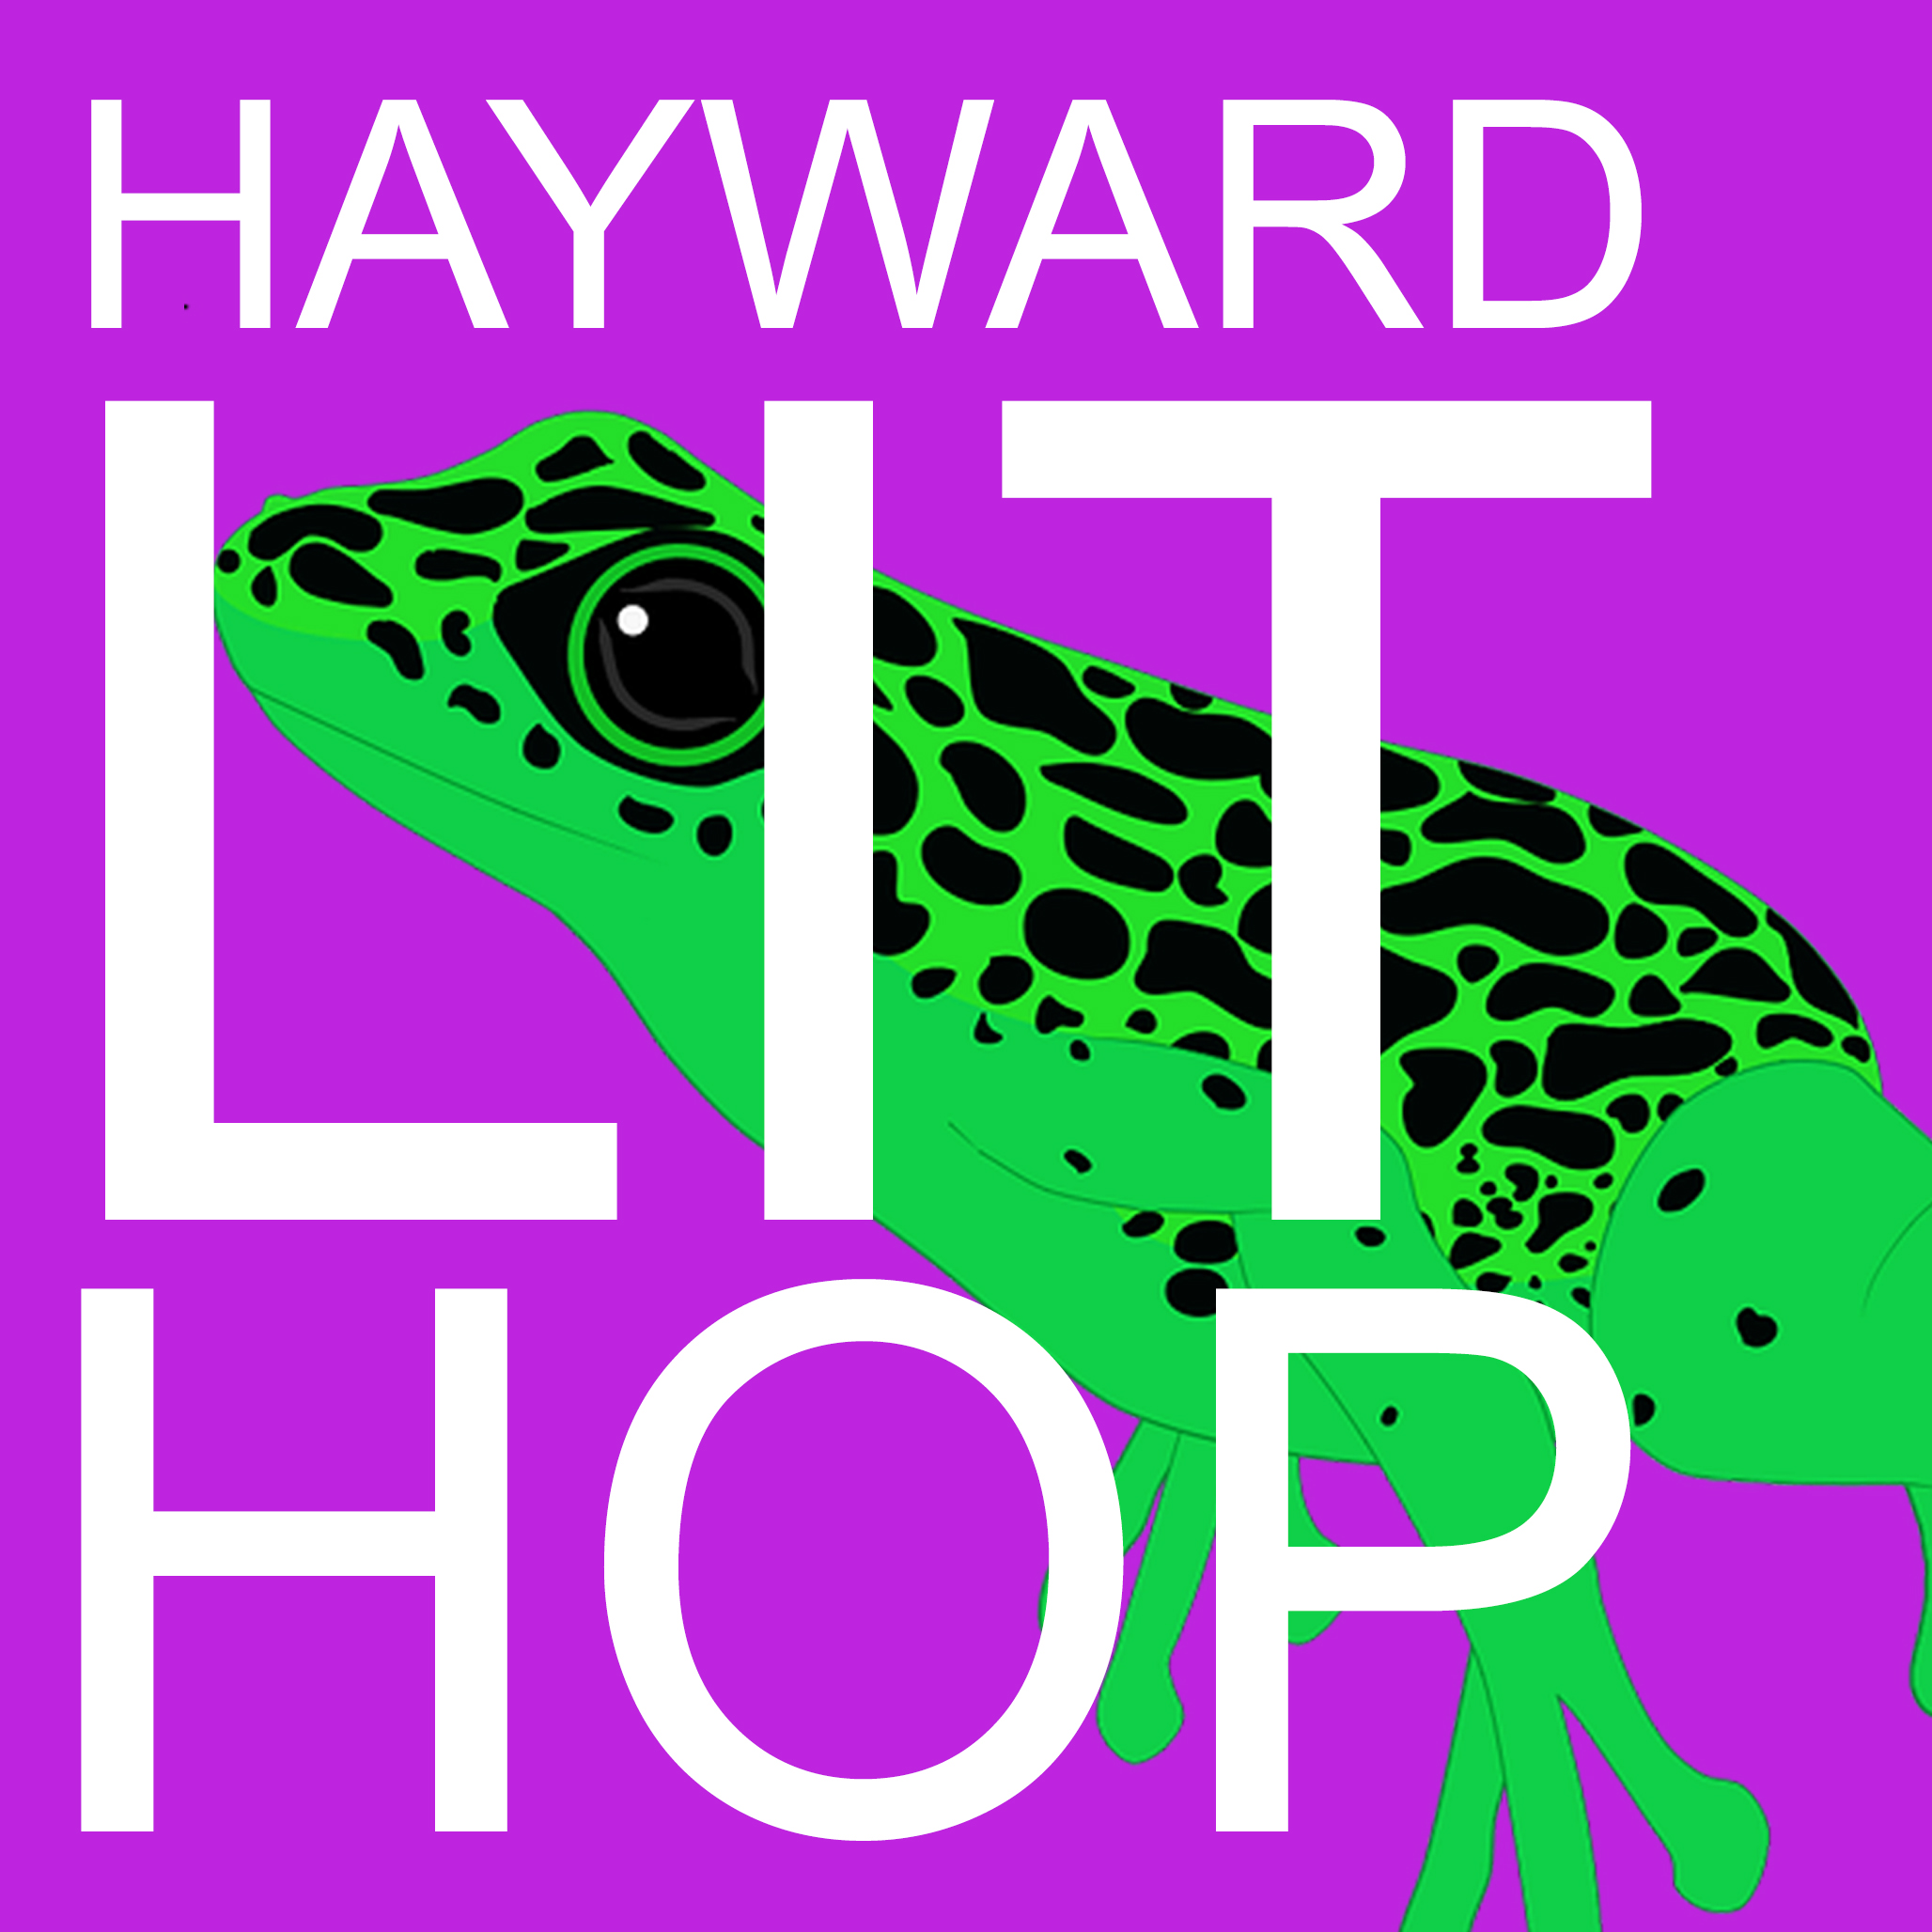 A green-and-black speckled frog jumping across a purple background, with the words Hayward Lit Hop superimposed